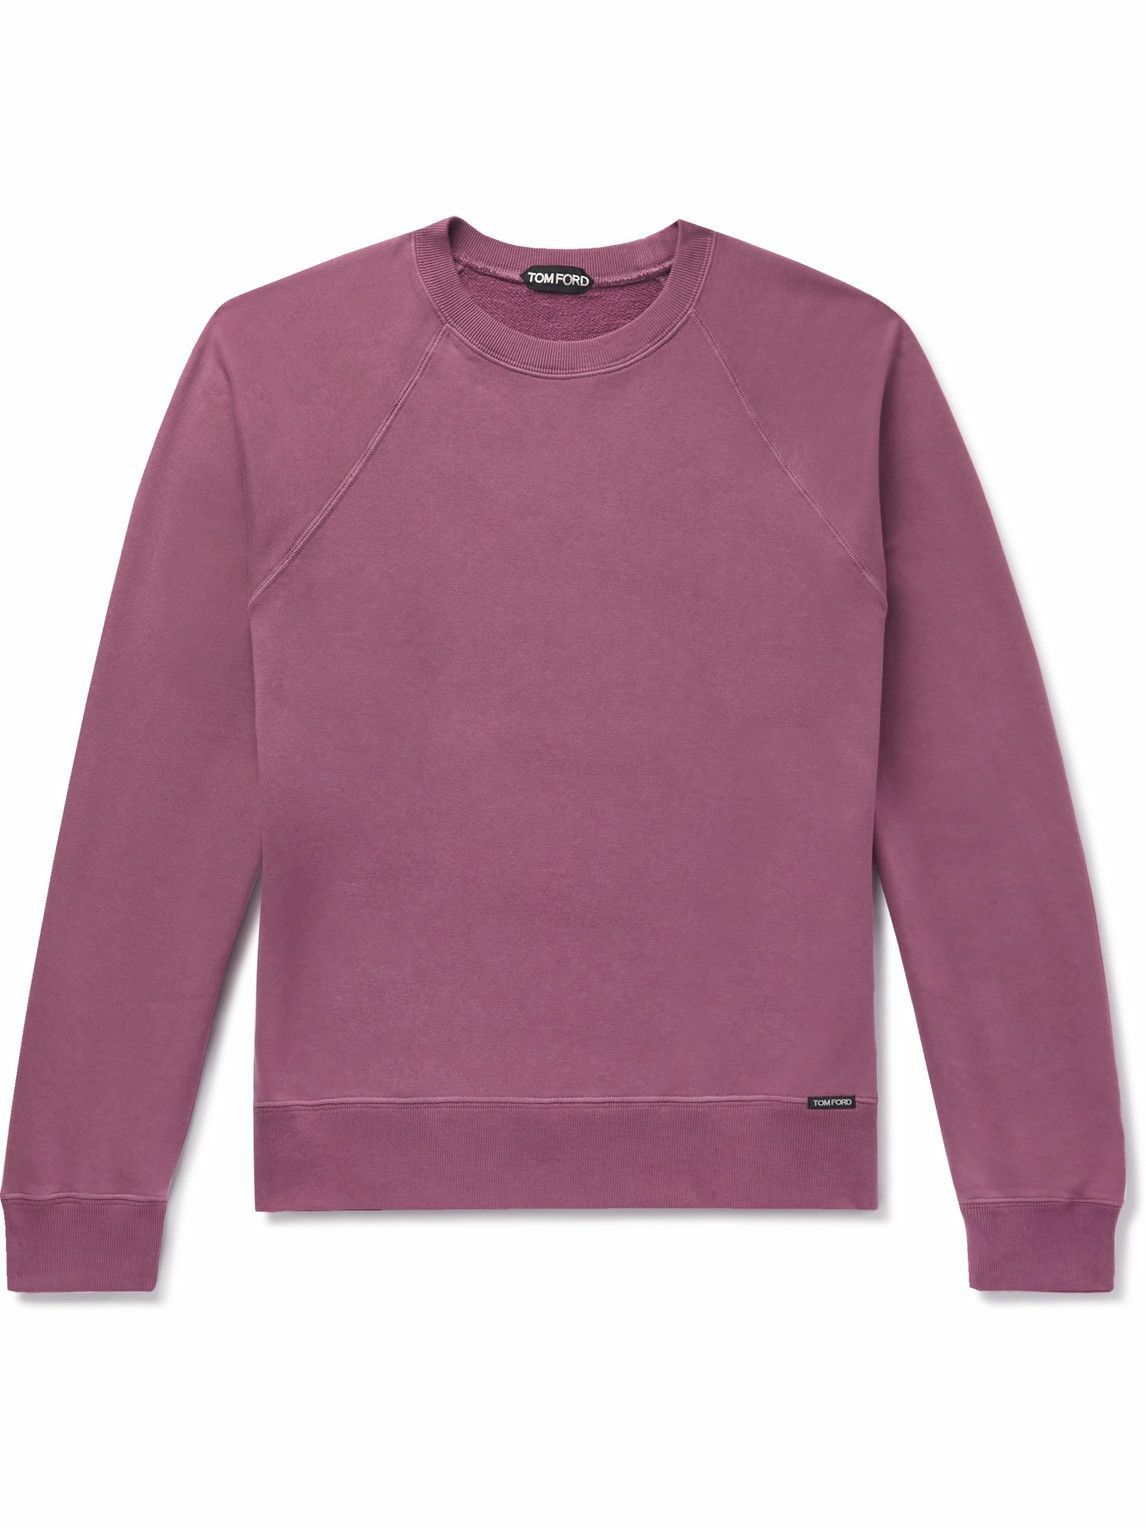 TOM FORD - Garment-Dyed Cotton-Jersey Sweatshirt - Pink TOM FORD